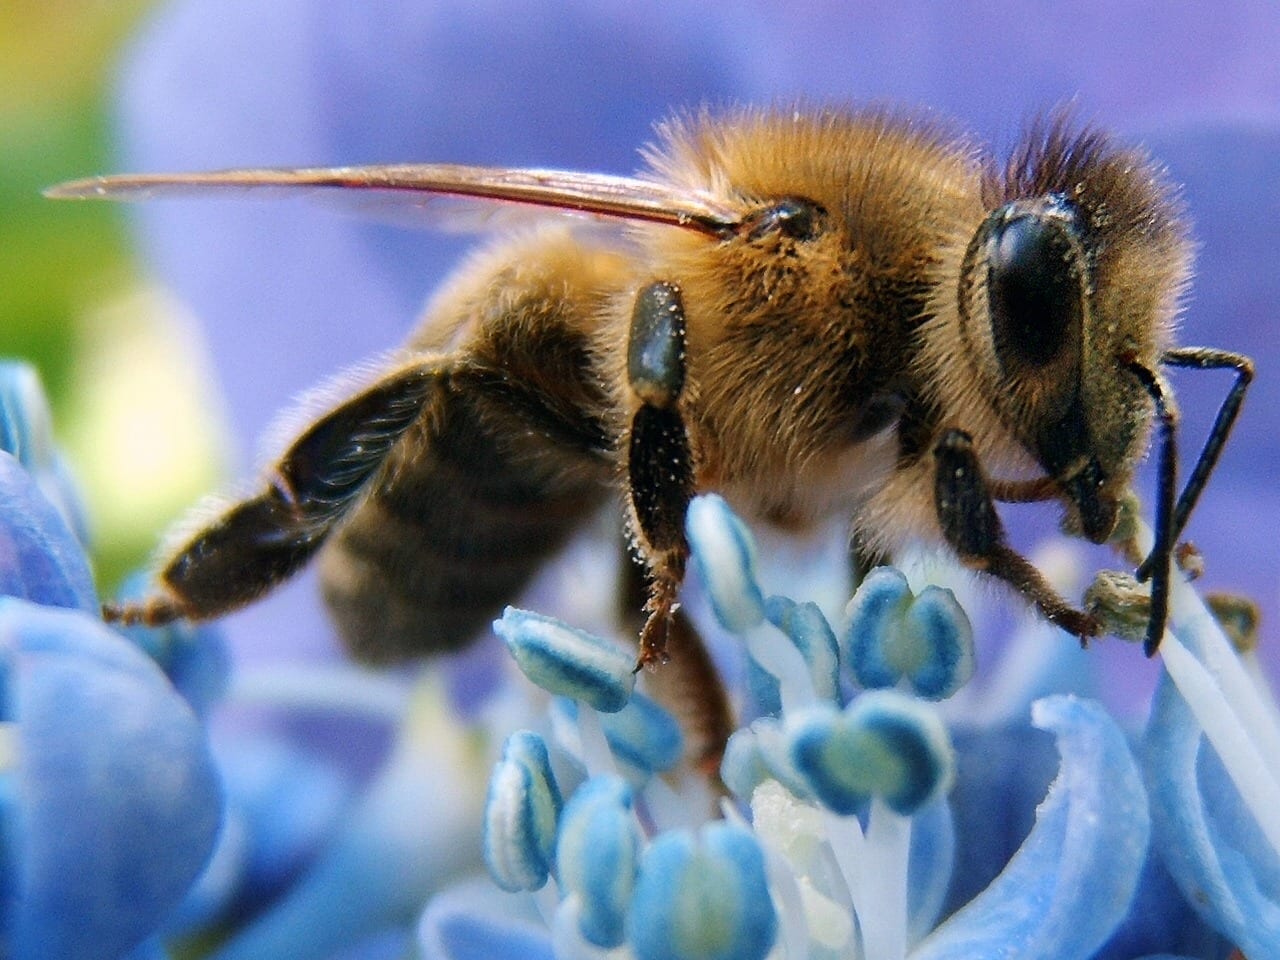 Do Honeybees Feel? Scientists Are Entertaining the Idea